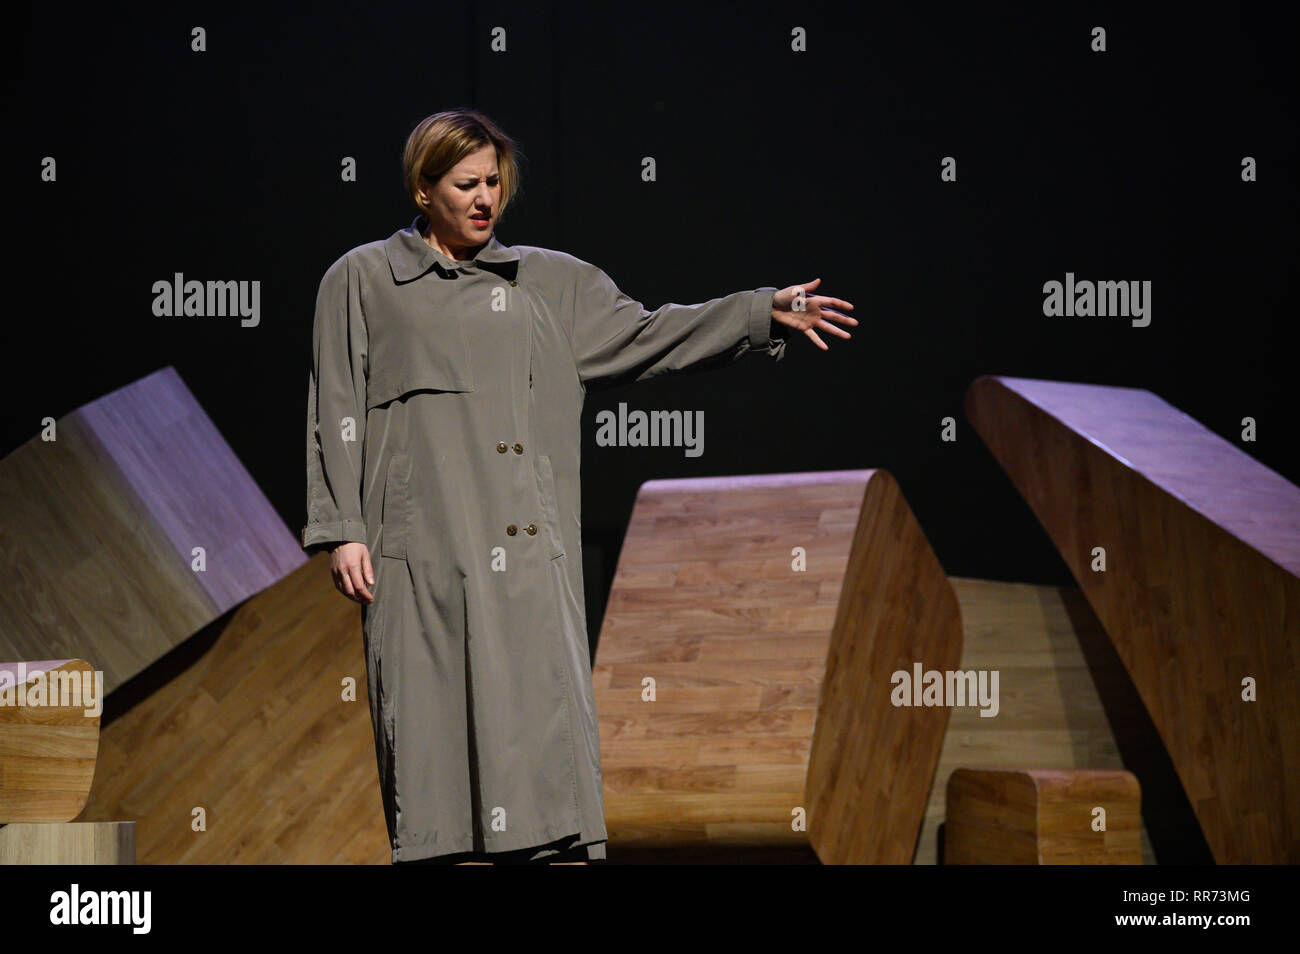 Bremen, Germany. 19th Feb, 2019. Silke Buchholz in the role of Angela Merkel in the time after her chancellorship appears during the rehearsal at the Shakespear Company in Bremen. The premiere of the play 'Angela I.' will take place on 28.02.2019. (to dpa 'play 'Angela I.' catapults post-Merkel era into now') Credit: Mohssen Assanimoghaddam/dpa/Alamy Live News Stock Photo